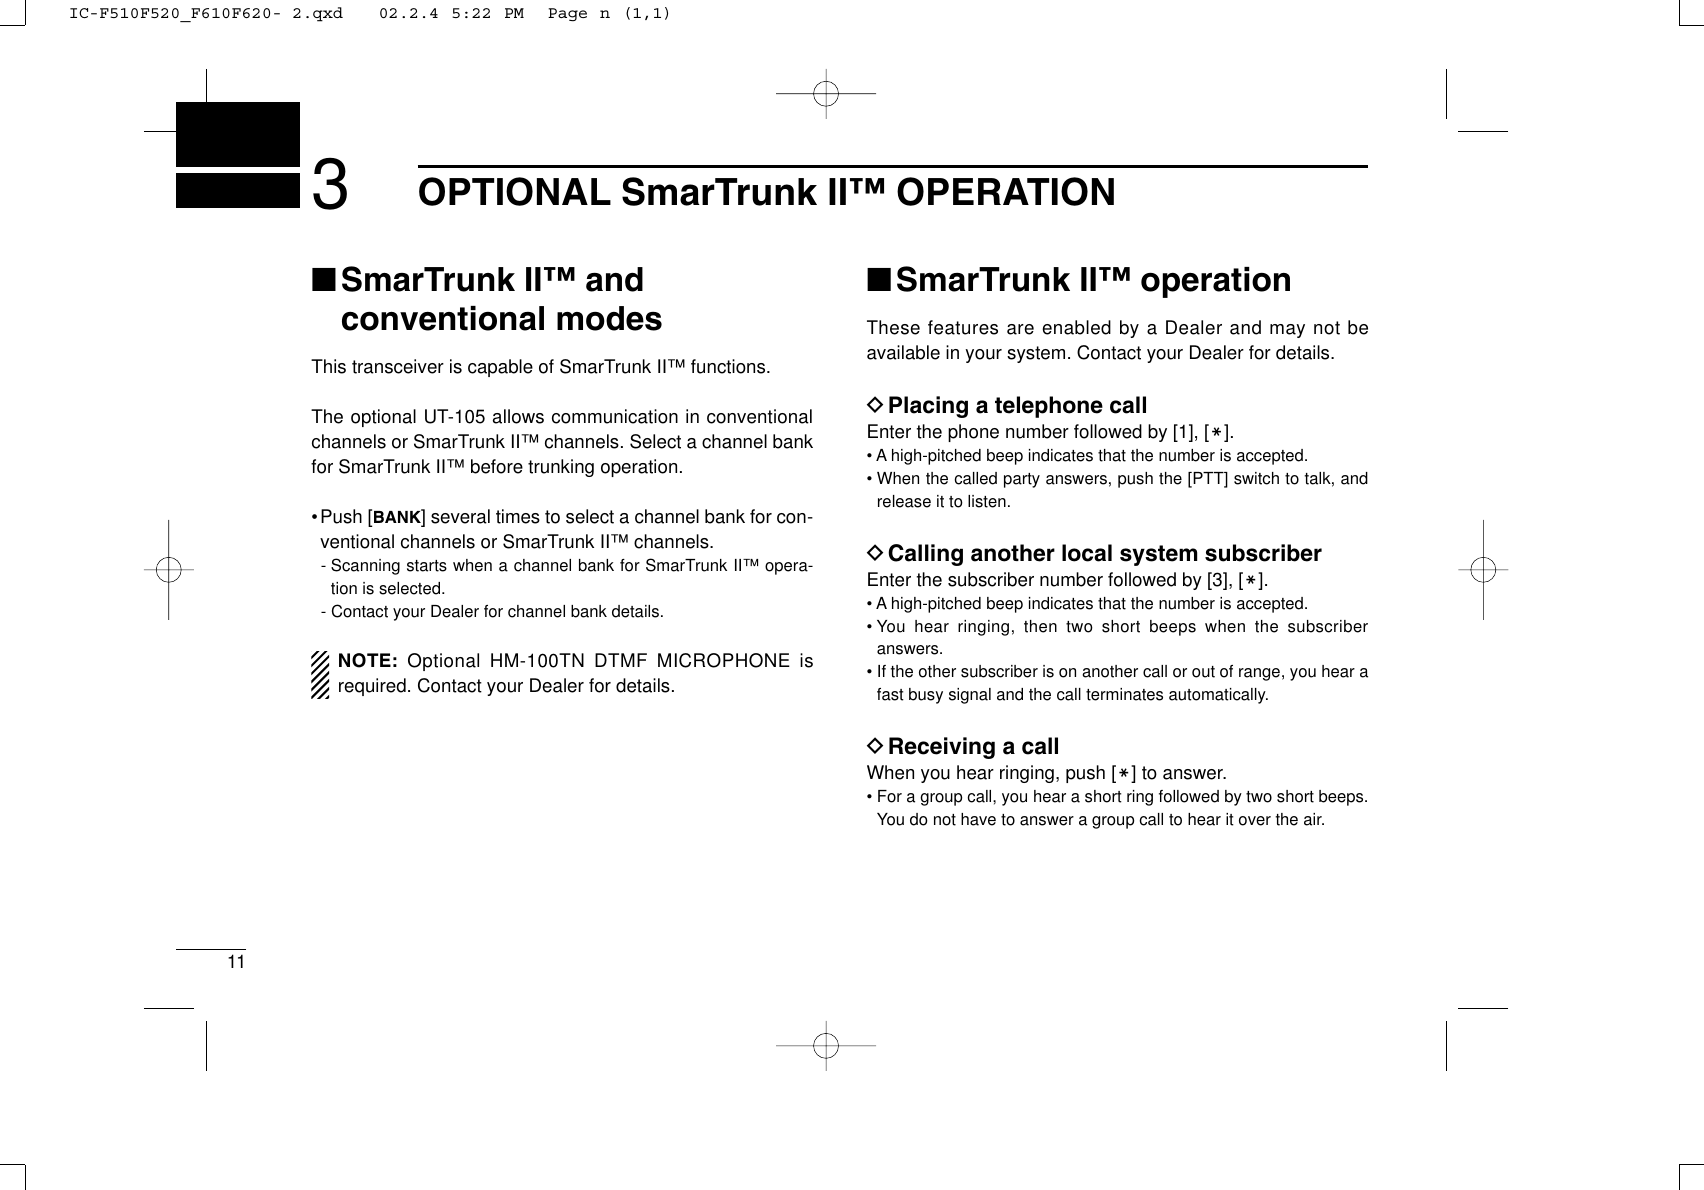 113OPTIONAL SmarTrunk II™ OPERATION■SmarTrunk II™ and conventional modesThis transceiver is capable of SmarTrunk II™ functions.The optional UT-105 allows communication in conventionalchannels or SmarTrunk II™ channels. Select a channel bankfor SmarTrunk II™ before trunking operation.•Push [BANK] several times to select a channel bank for con-ventional channels or SmarTrunk II™ channels.- Scanning starts when a channel bank for SmarTrunk II™ opera-tion is selected.- Contact your Dealer for channel bank details.NOTE: Optional HM-100TN DTMF MICROPHONE isrequired. Contact your Dealer for details.■SmarTrunk II™ operationThese features are enabled by a Dealer and may not beavailable in your system. Contact your Dealer for details.DPlacing a telephone callEnter the phone number followed by [1], [M].• A high-pitched beep indicates that the number is accepted.• When the called party answers, push the [PTT] switch to talk, andrelease it to listen.DCalling another local system subscriberEnter the subscriber number followed by [3], [M].• A high-pitched beep indicates that the number is accepted.• You hear ringing, then two short beeps when the subscriberanswers.• If the other subscriber is on another call or out of range, you hear afast busy signal and the call terminates automatically.DReceiving a callWhen you hear ringing, push [M] to answer.• For a group call, you hear a short ring followed by two short beeps.You do not have to answer a group call to hear it over the air.IC-F510F520_F610F620- 2.qxd   02.2.4 5:22 PM  Page n (1,1)